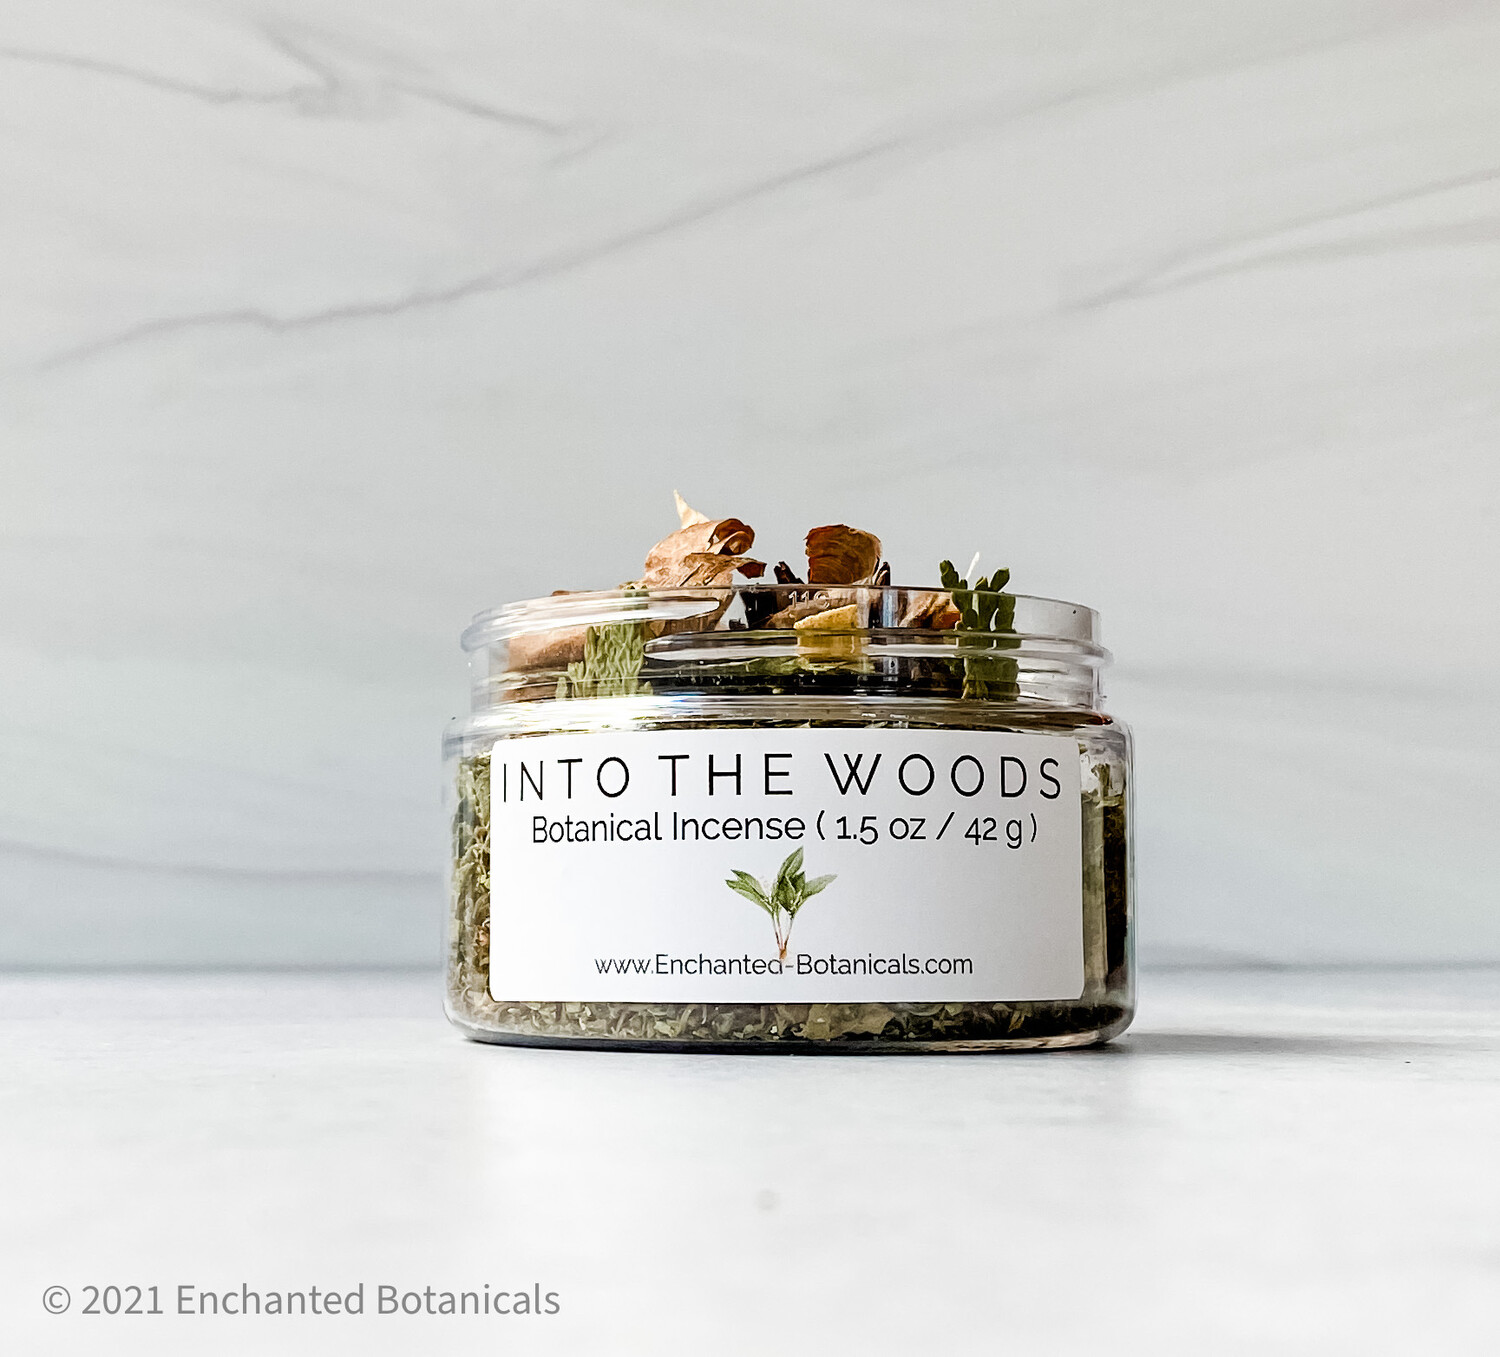 INTO THE WOODS Botanical Incense